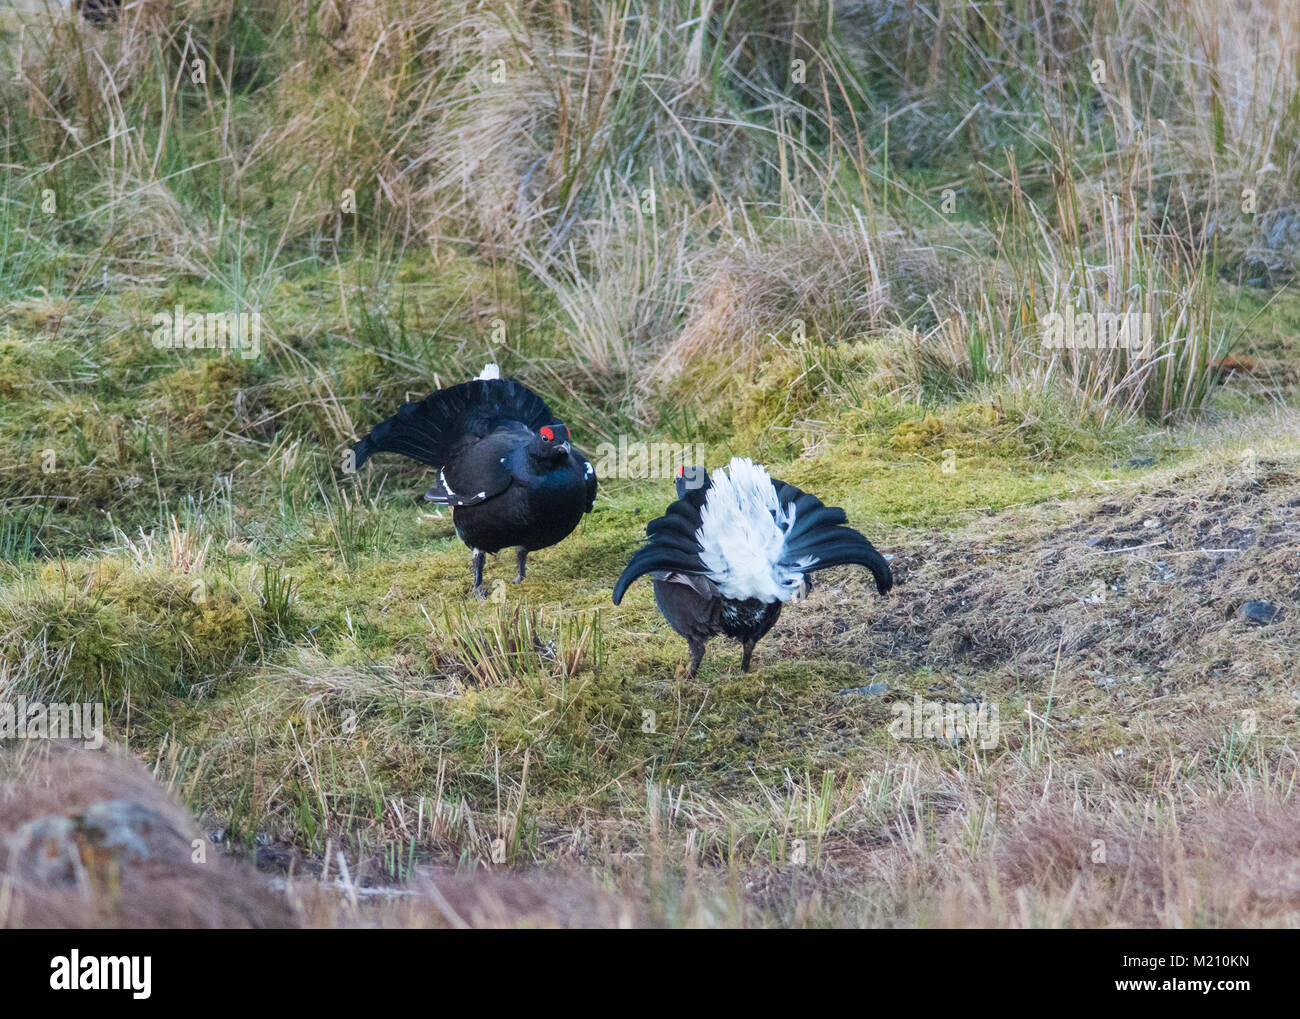 Male Black Grouse Lyrurus tetrix lekking at sunrise on a northern moorland in the UK with several blackcocks present. Stock Photo